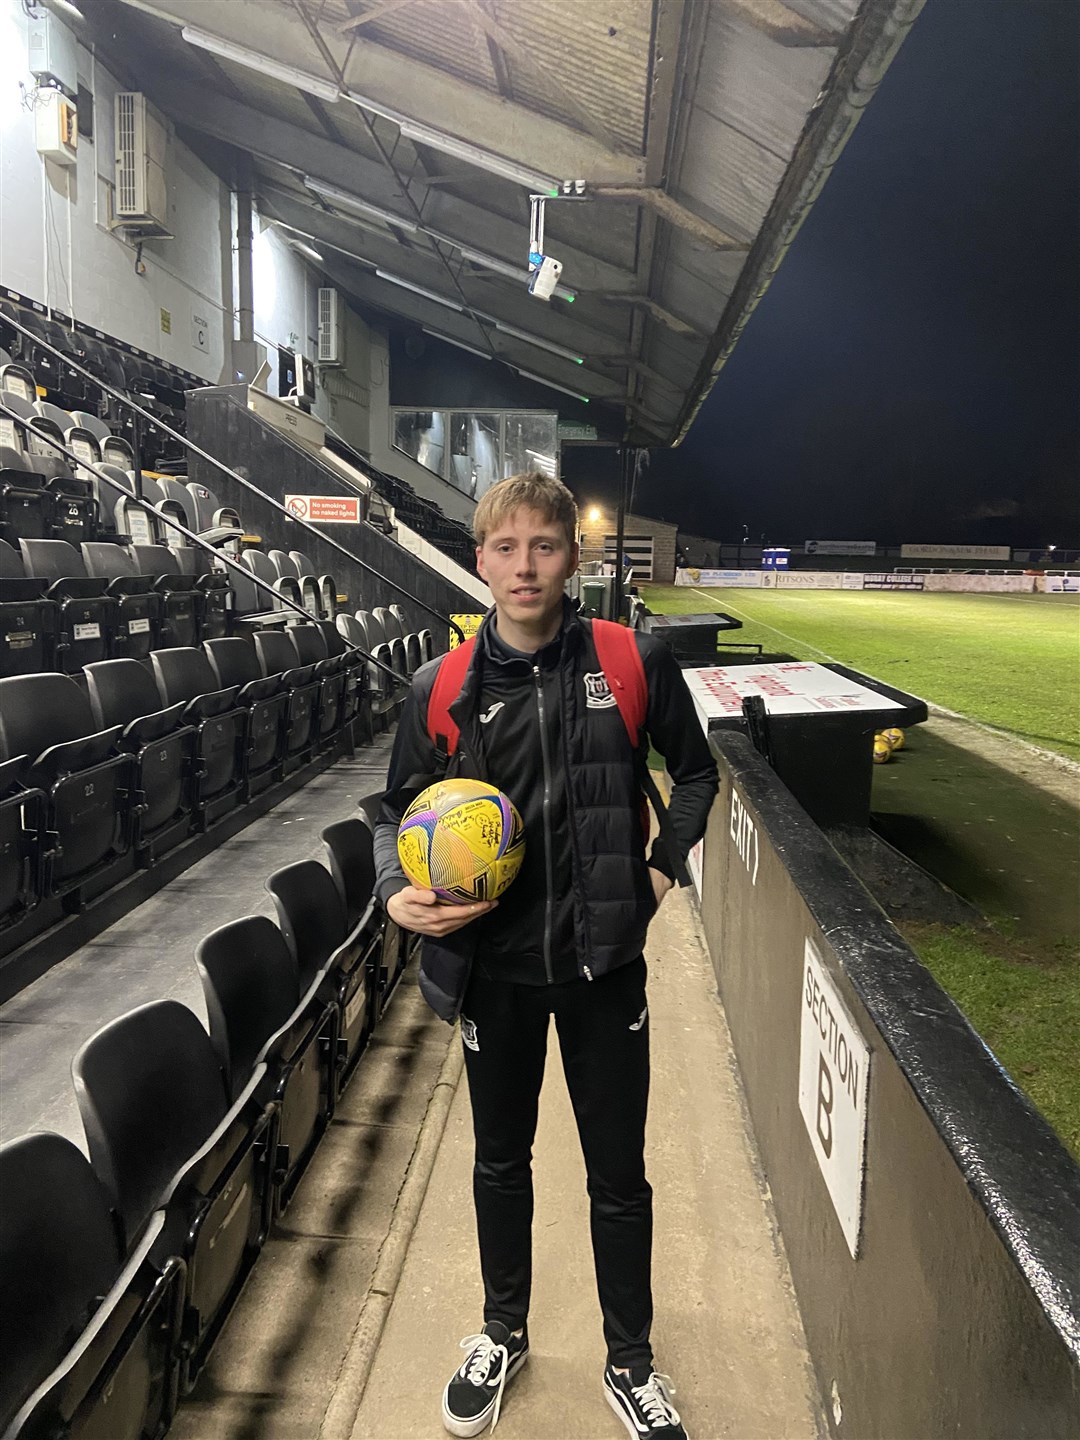 Hat-trick hero Kane Hester with the match ball.